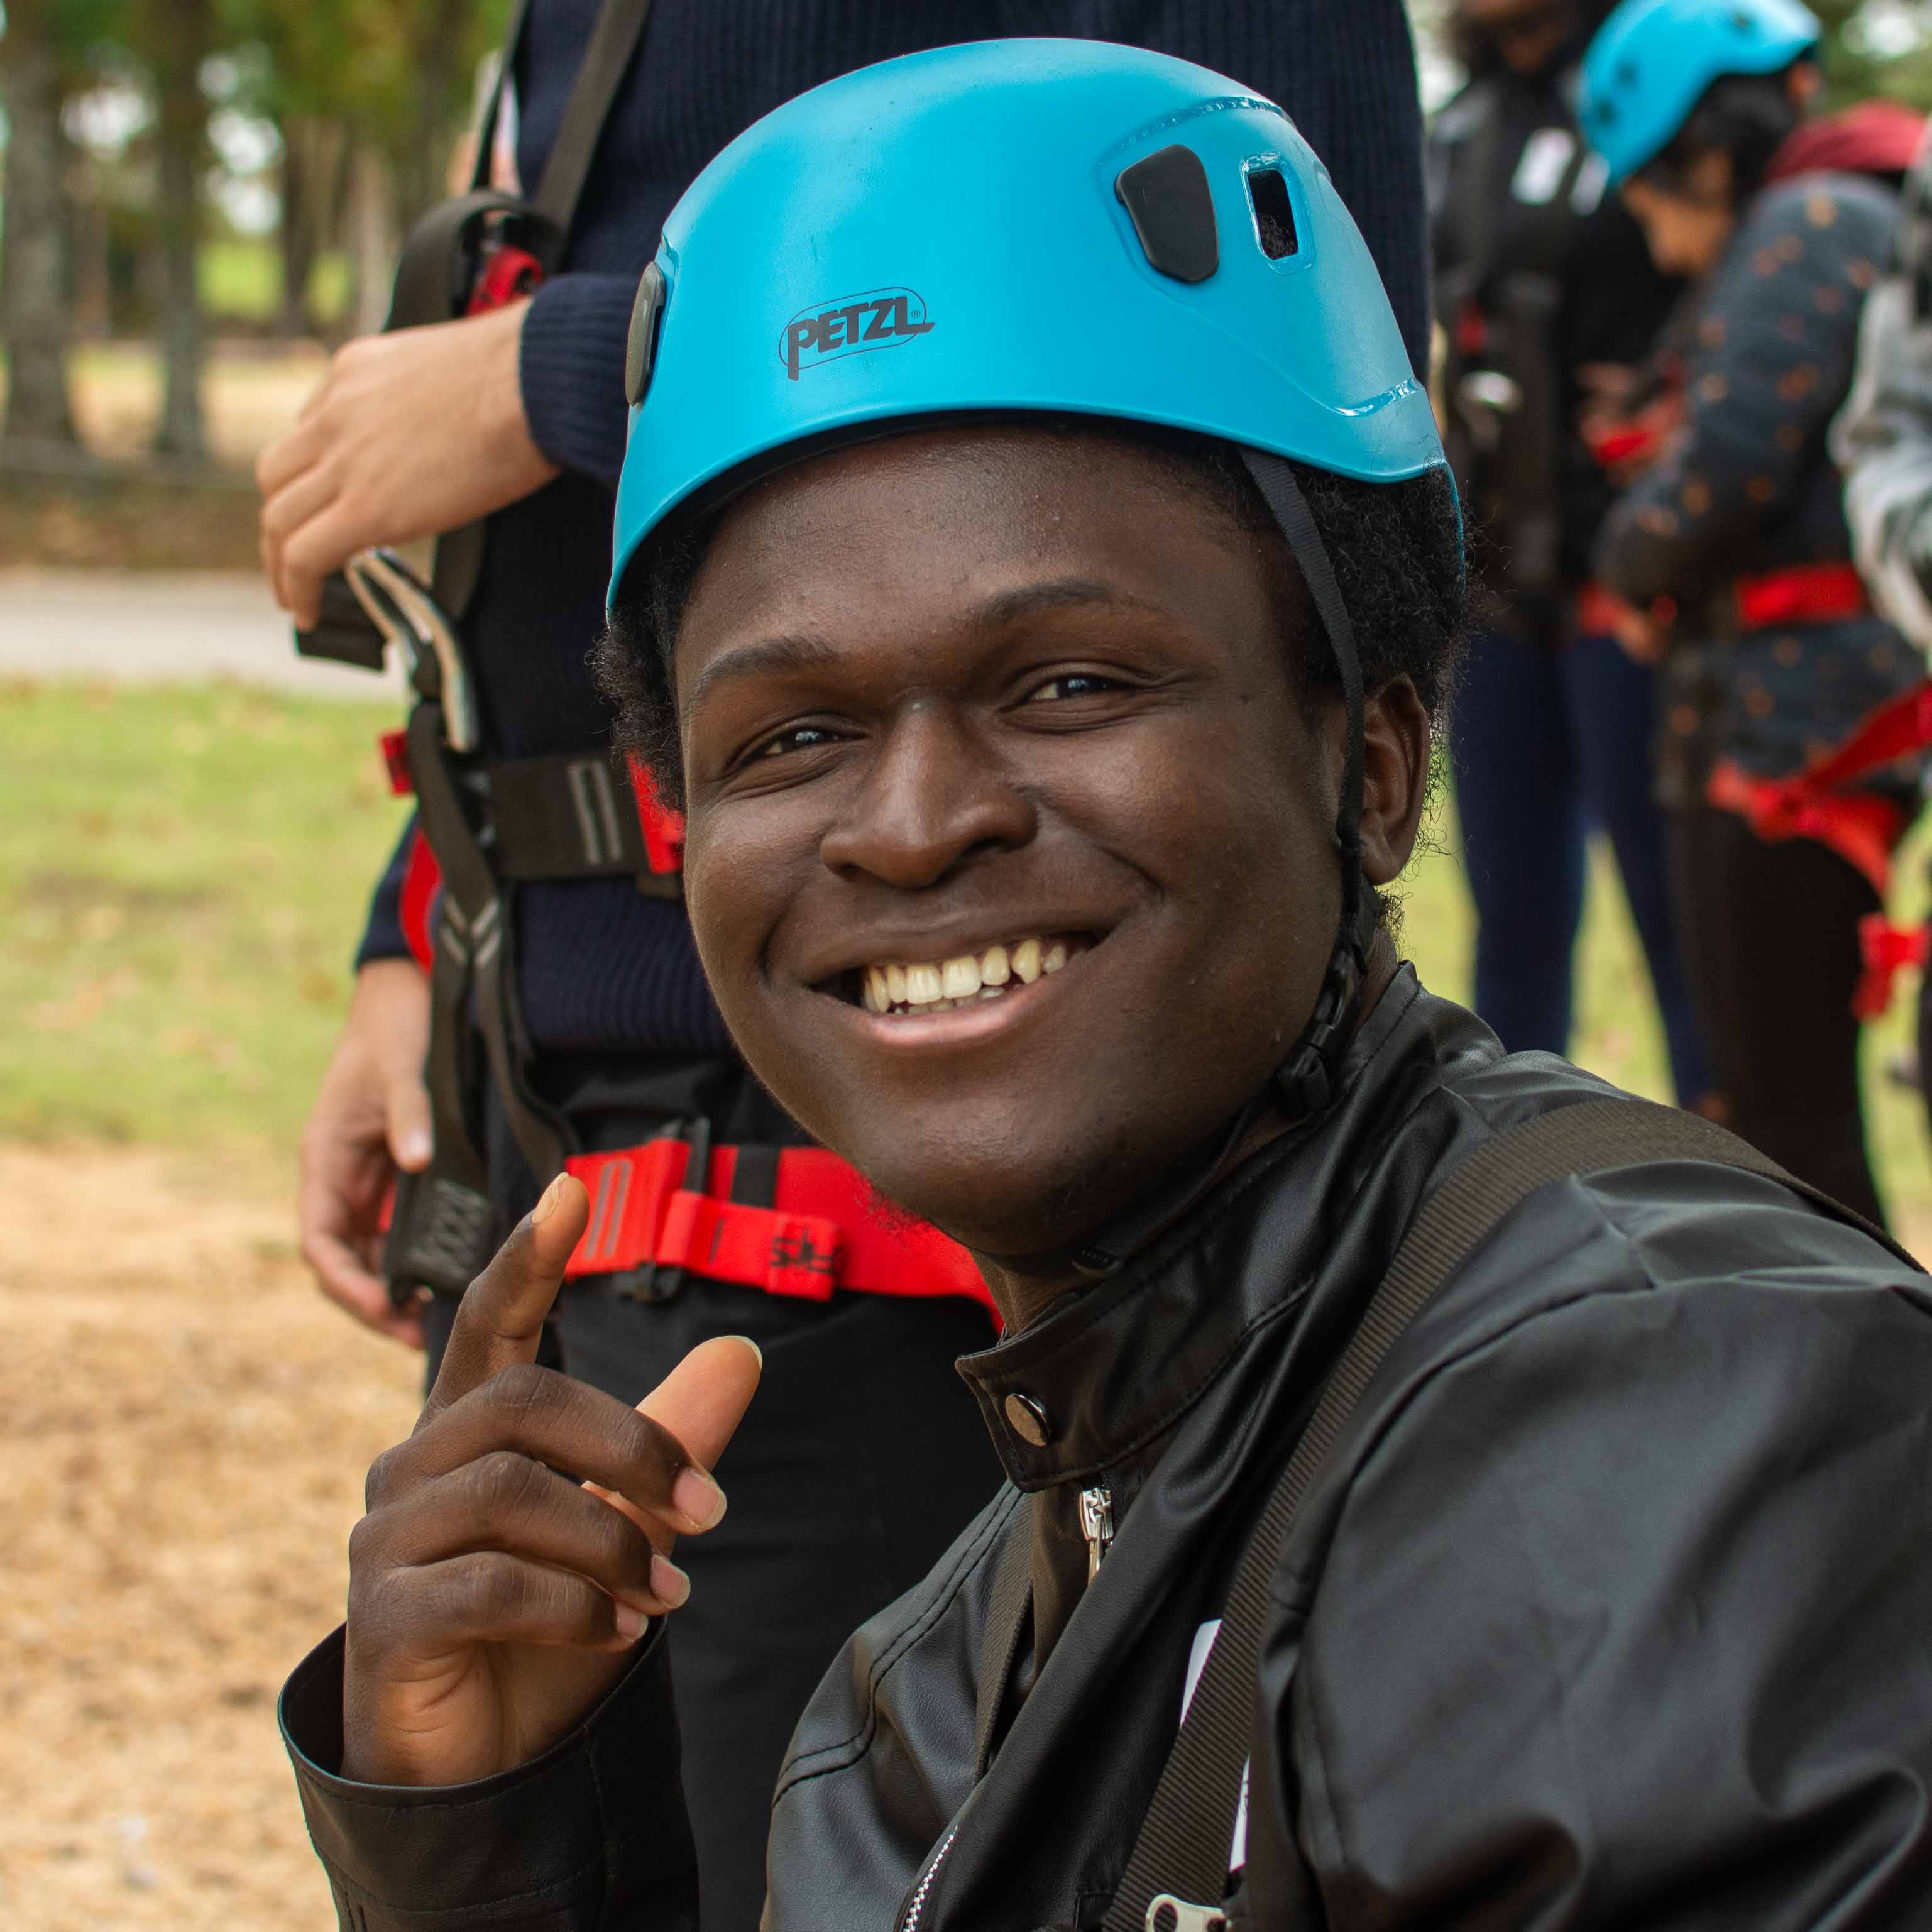 A man wearing a climbing helmet smiles for the camera.